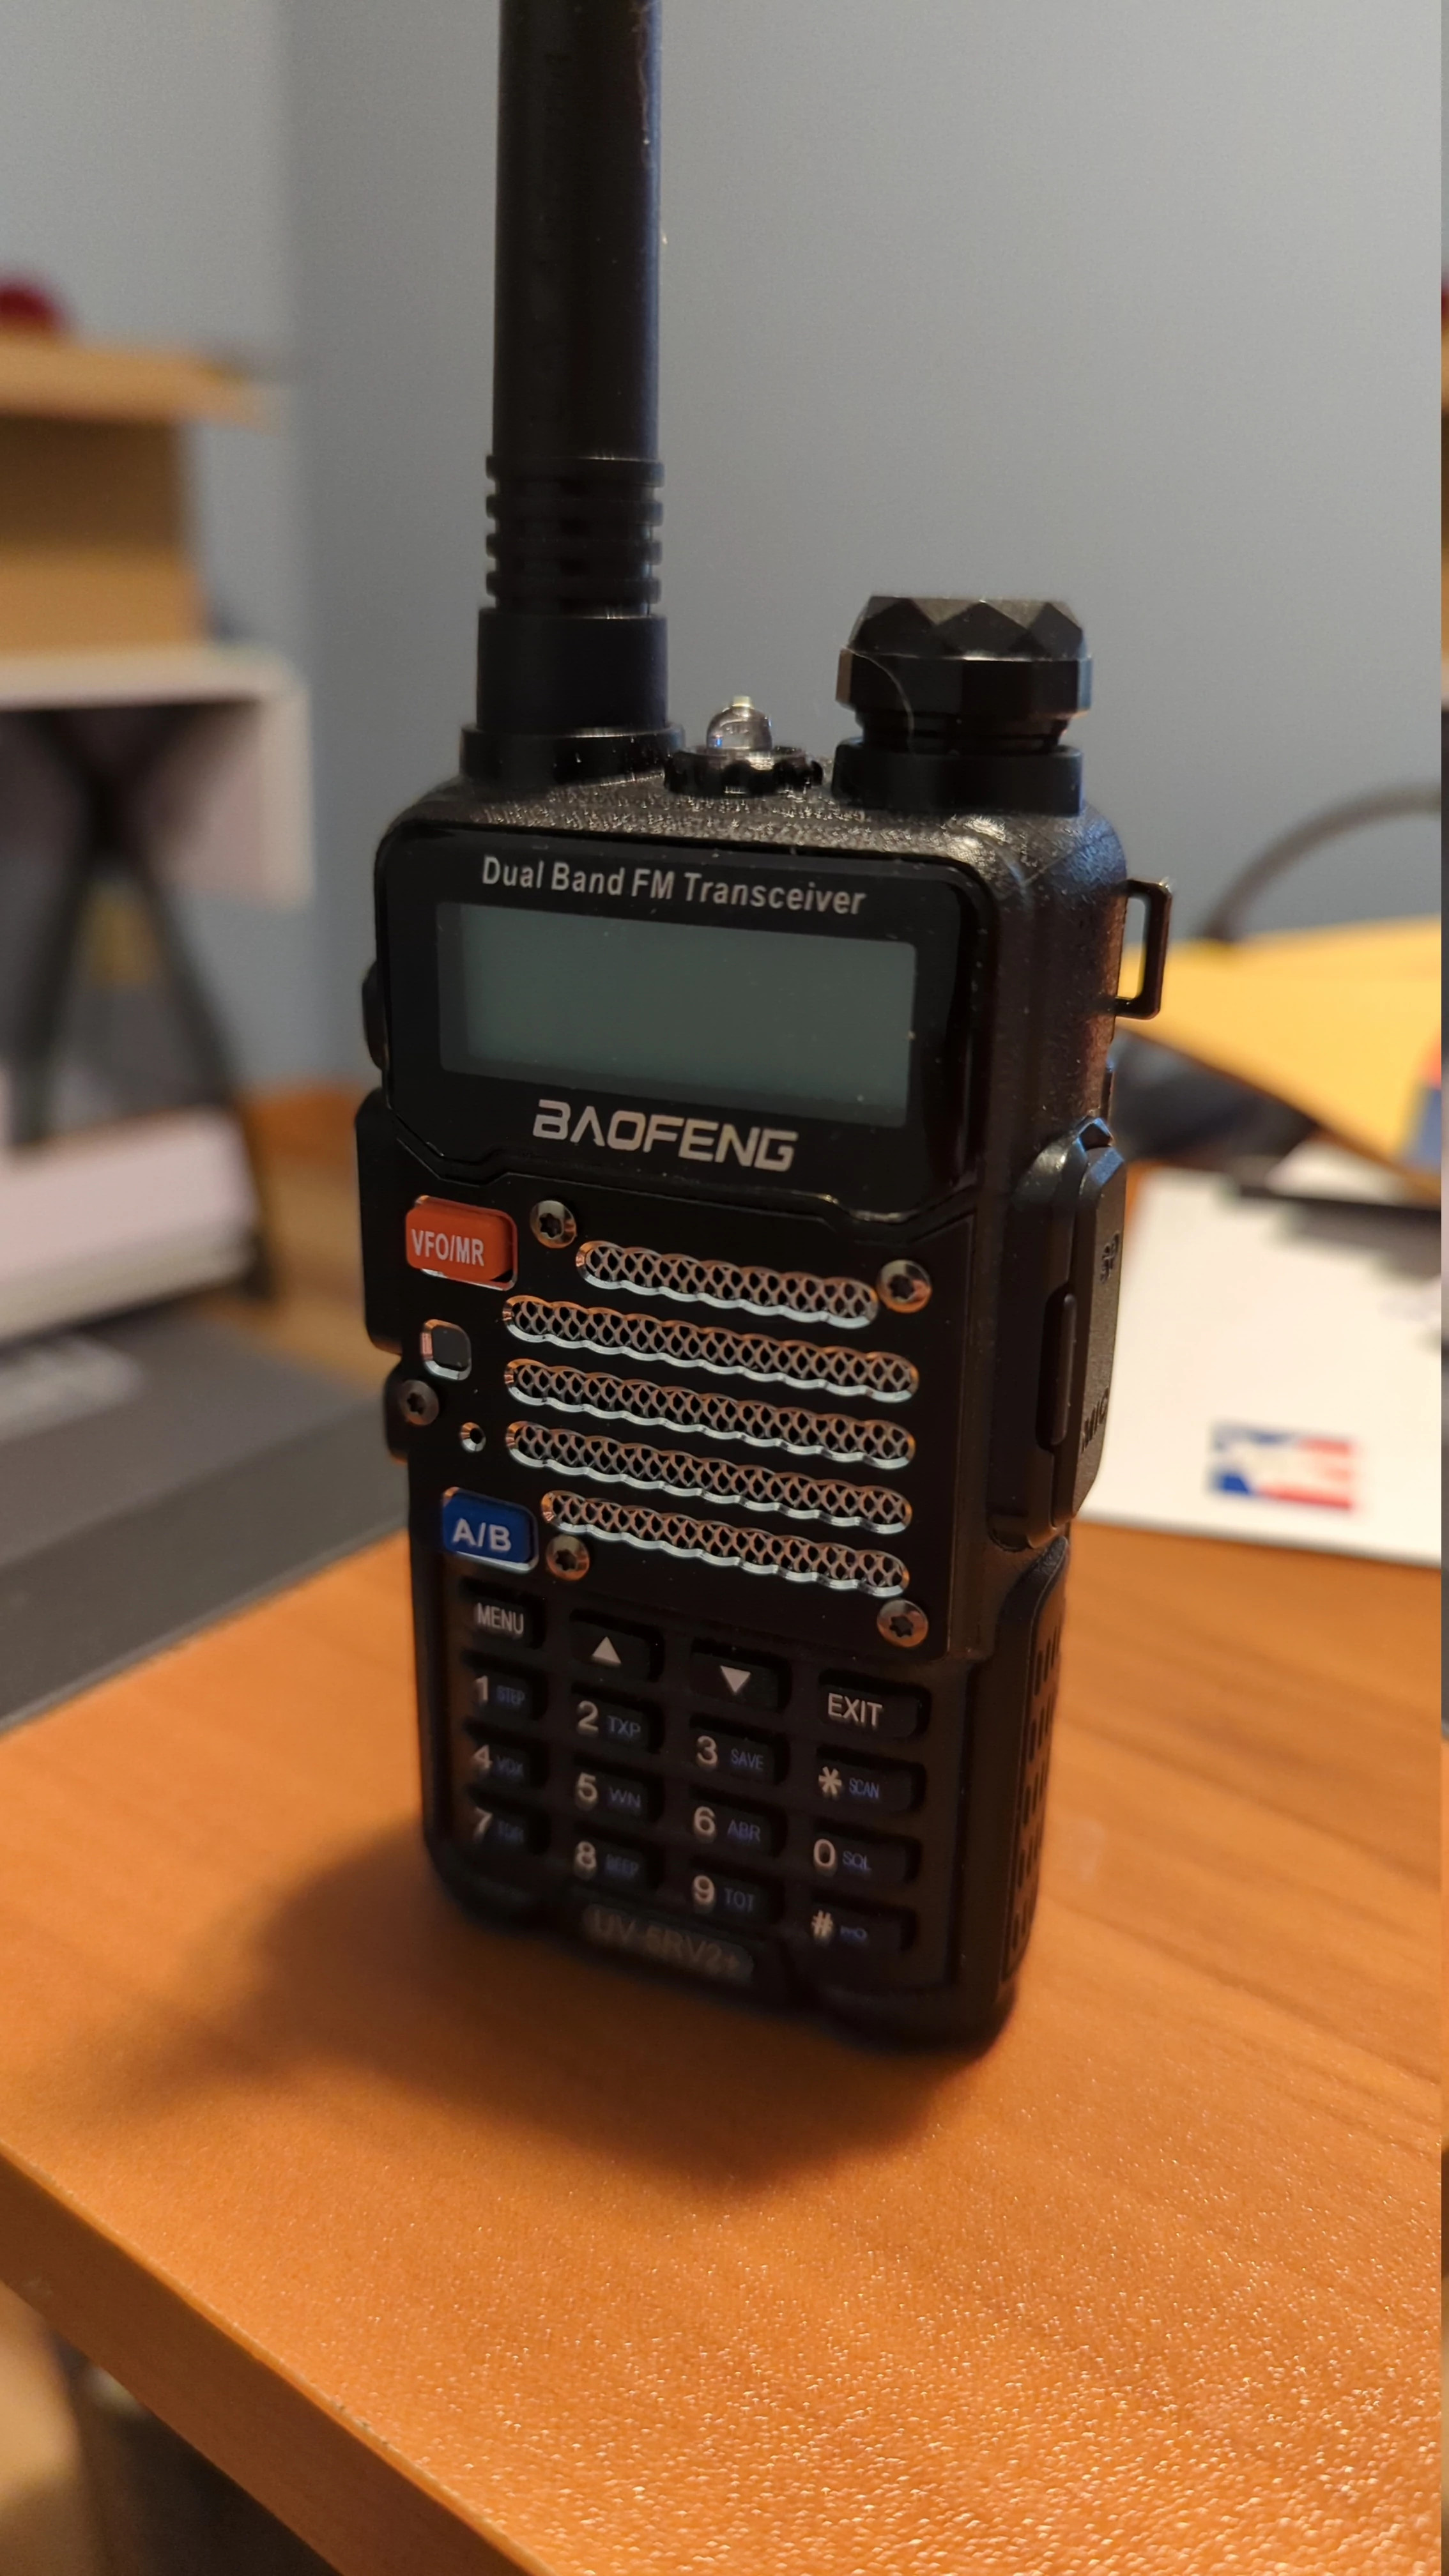 Baofeng UV-5RV2+ handheld radio with rubber duck antenna on a table